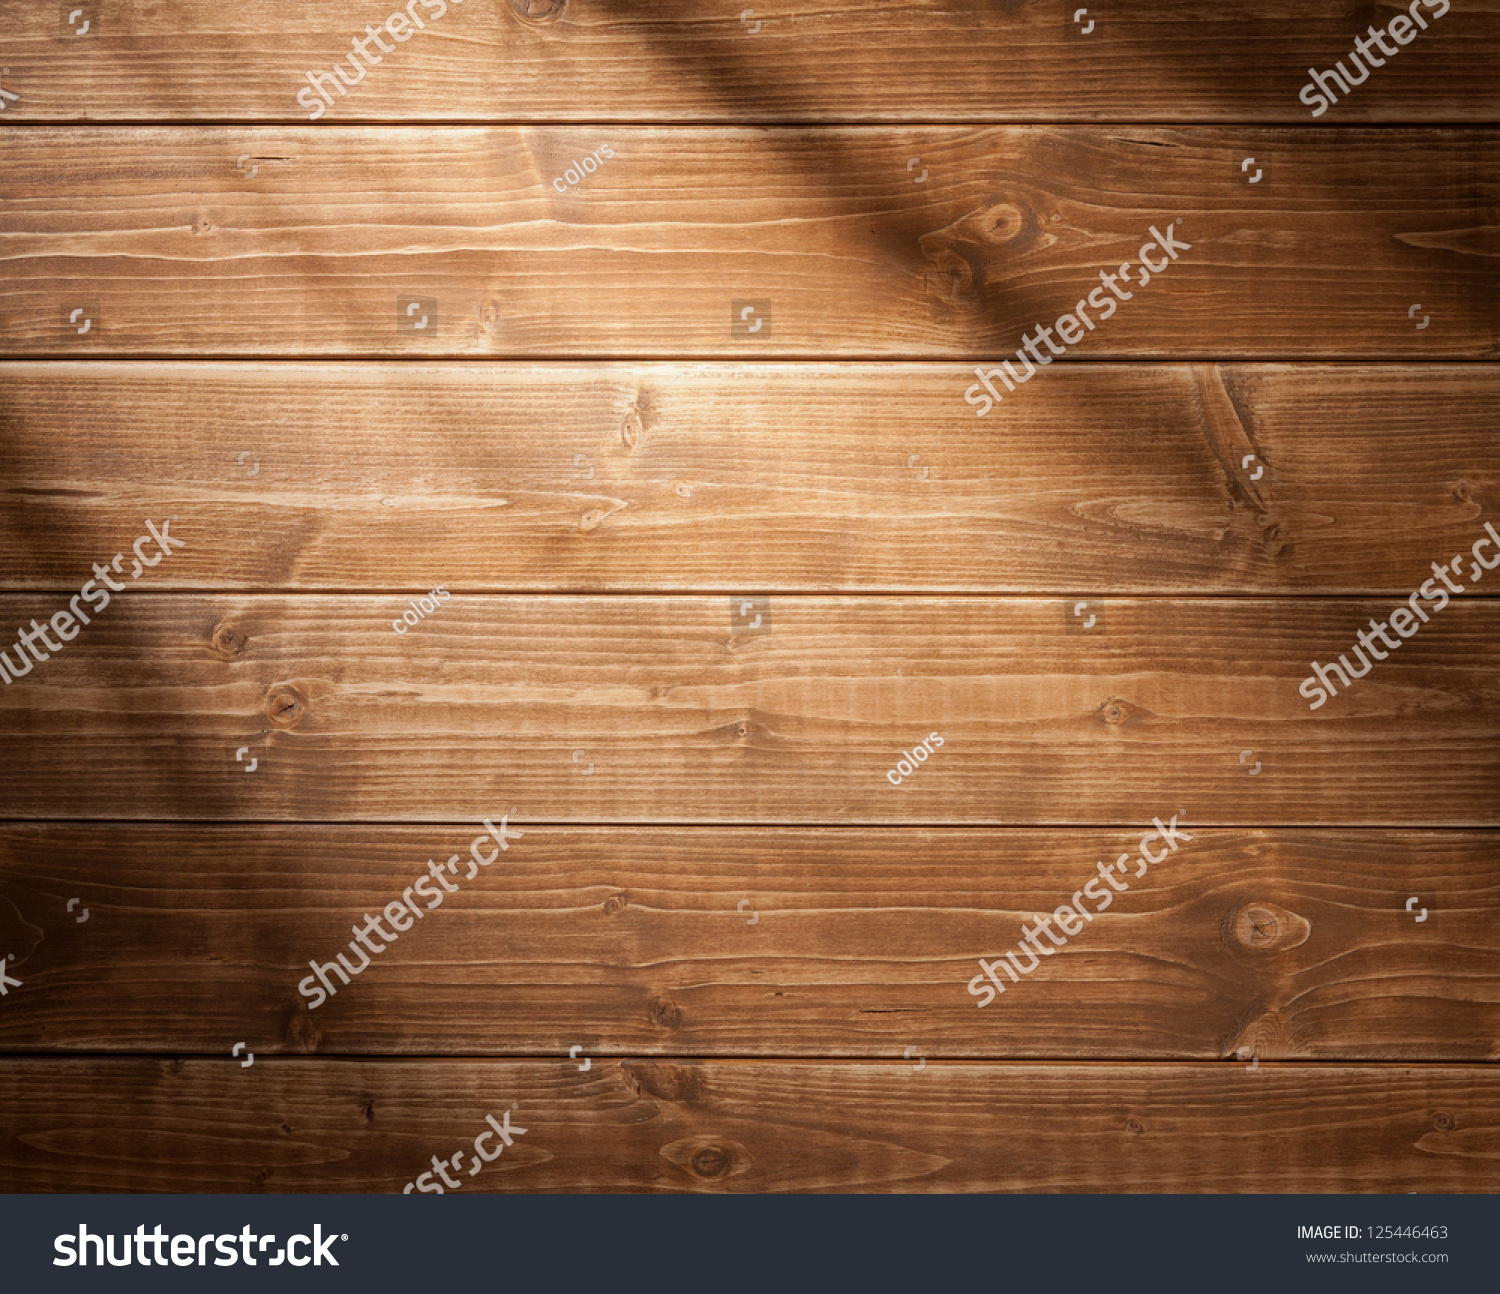 Wooden wall background in a morning light. With shadows from a window frame. #125446463